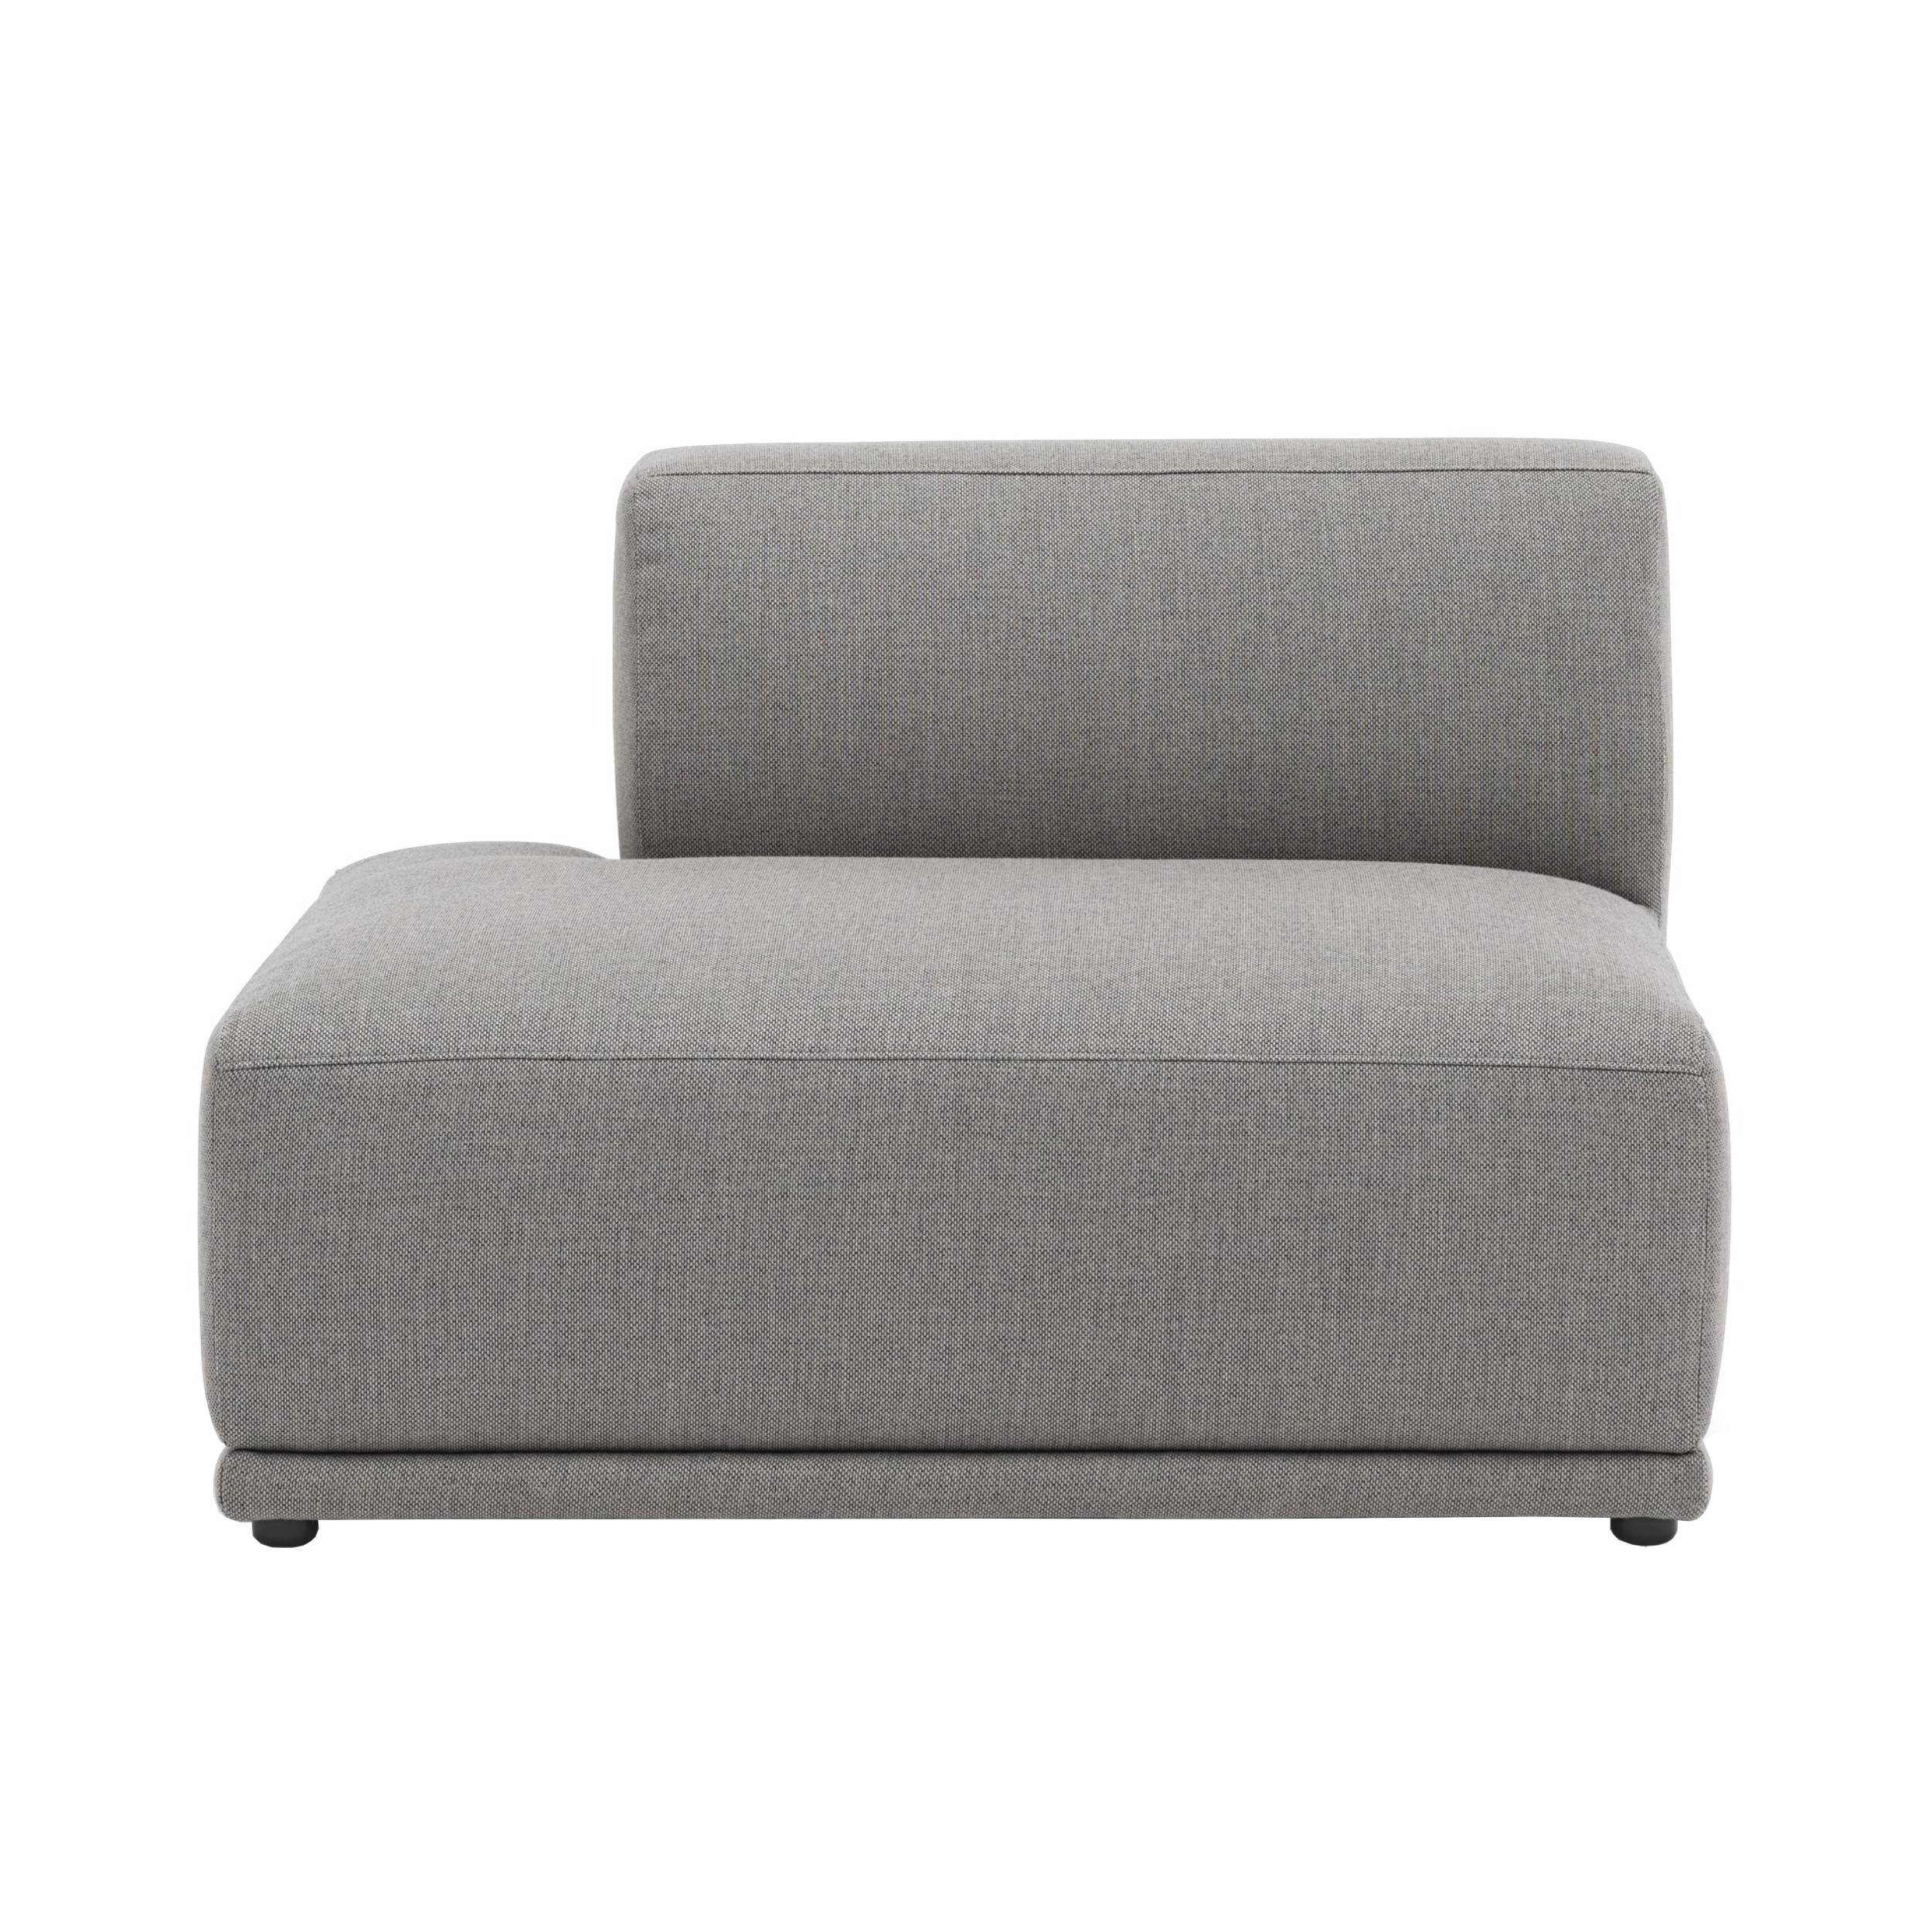 Connect Modular Sofa Pieces: F - Left Open-Ended